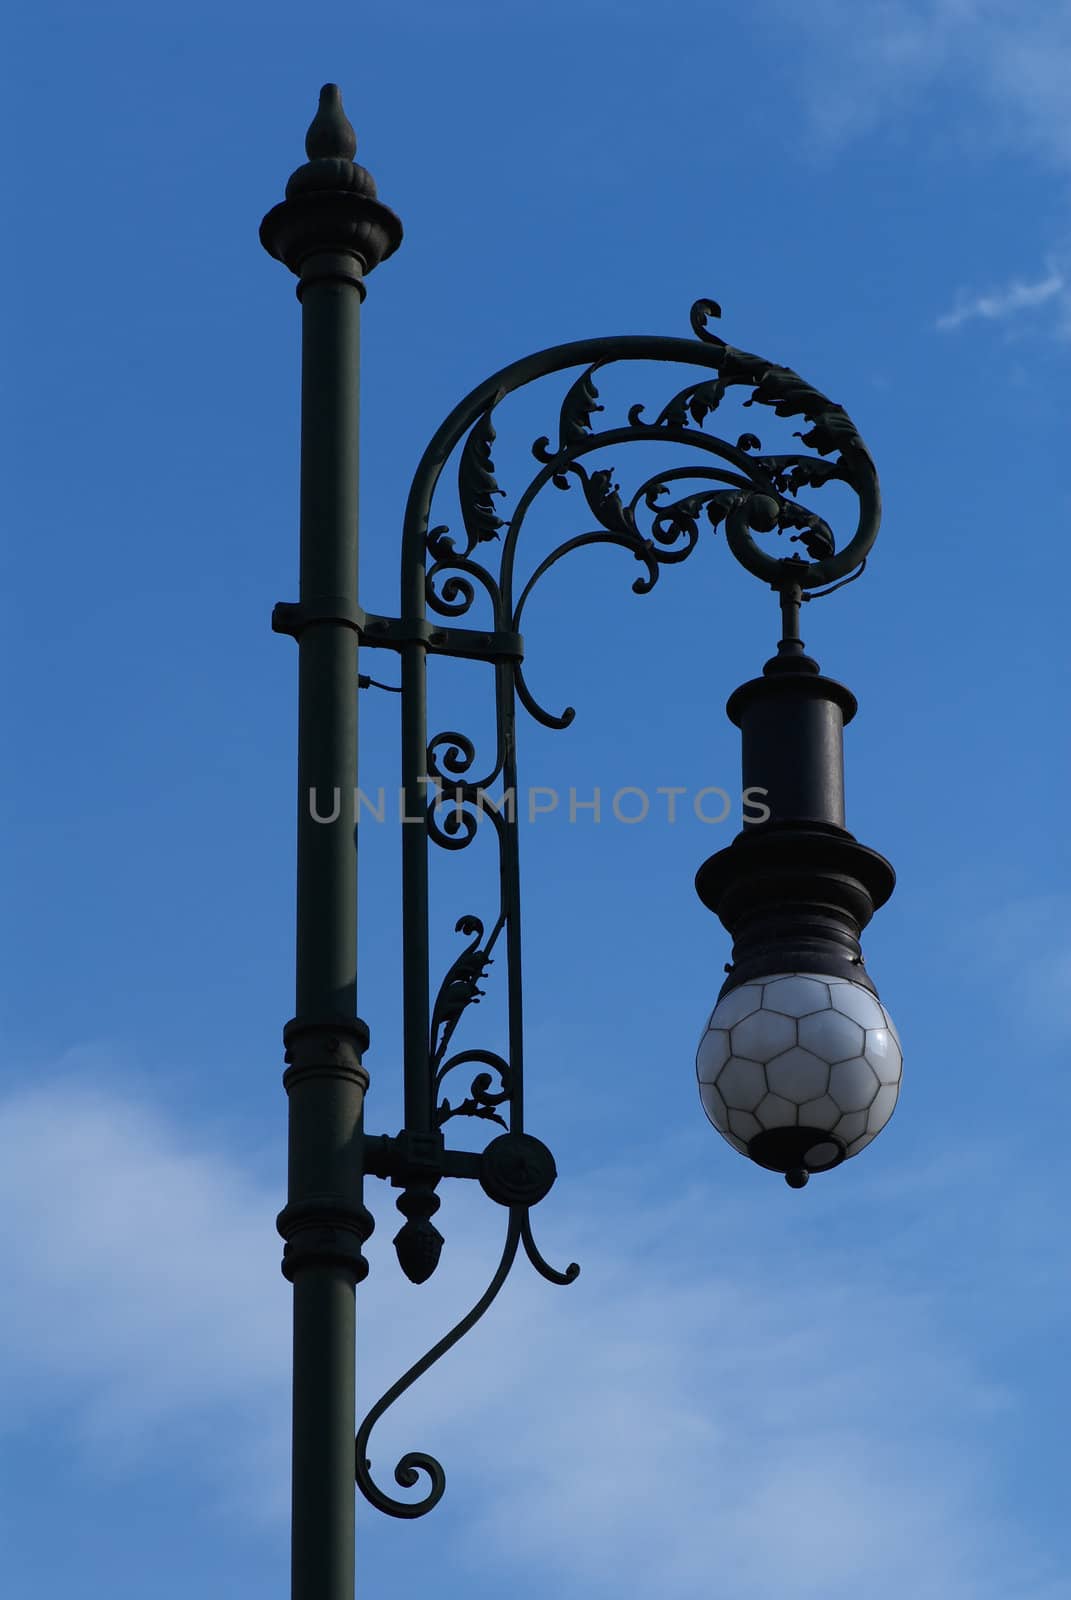 Photo of a street lantern on a background of the blue sky